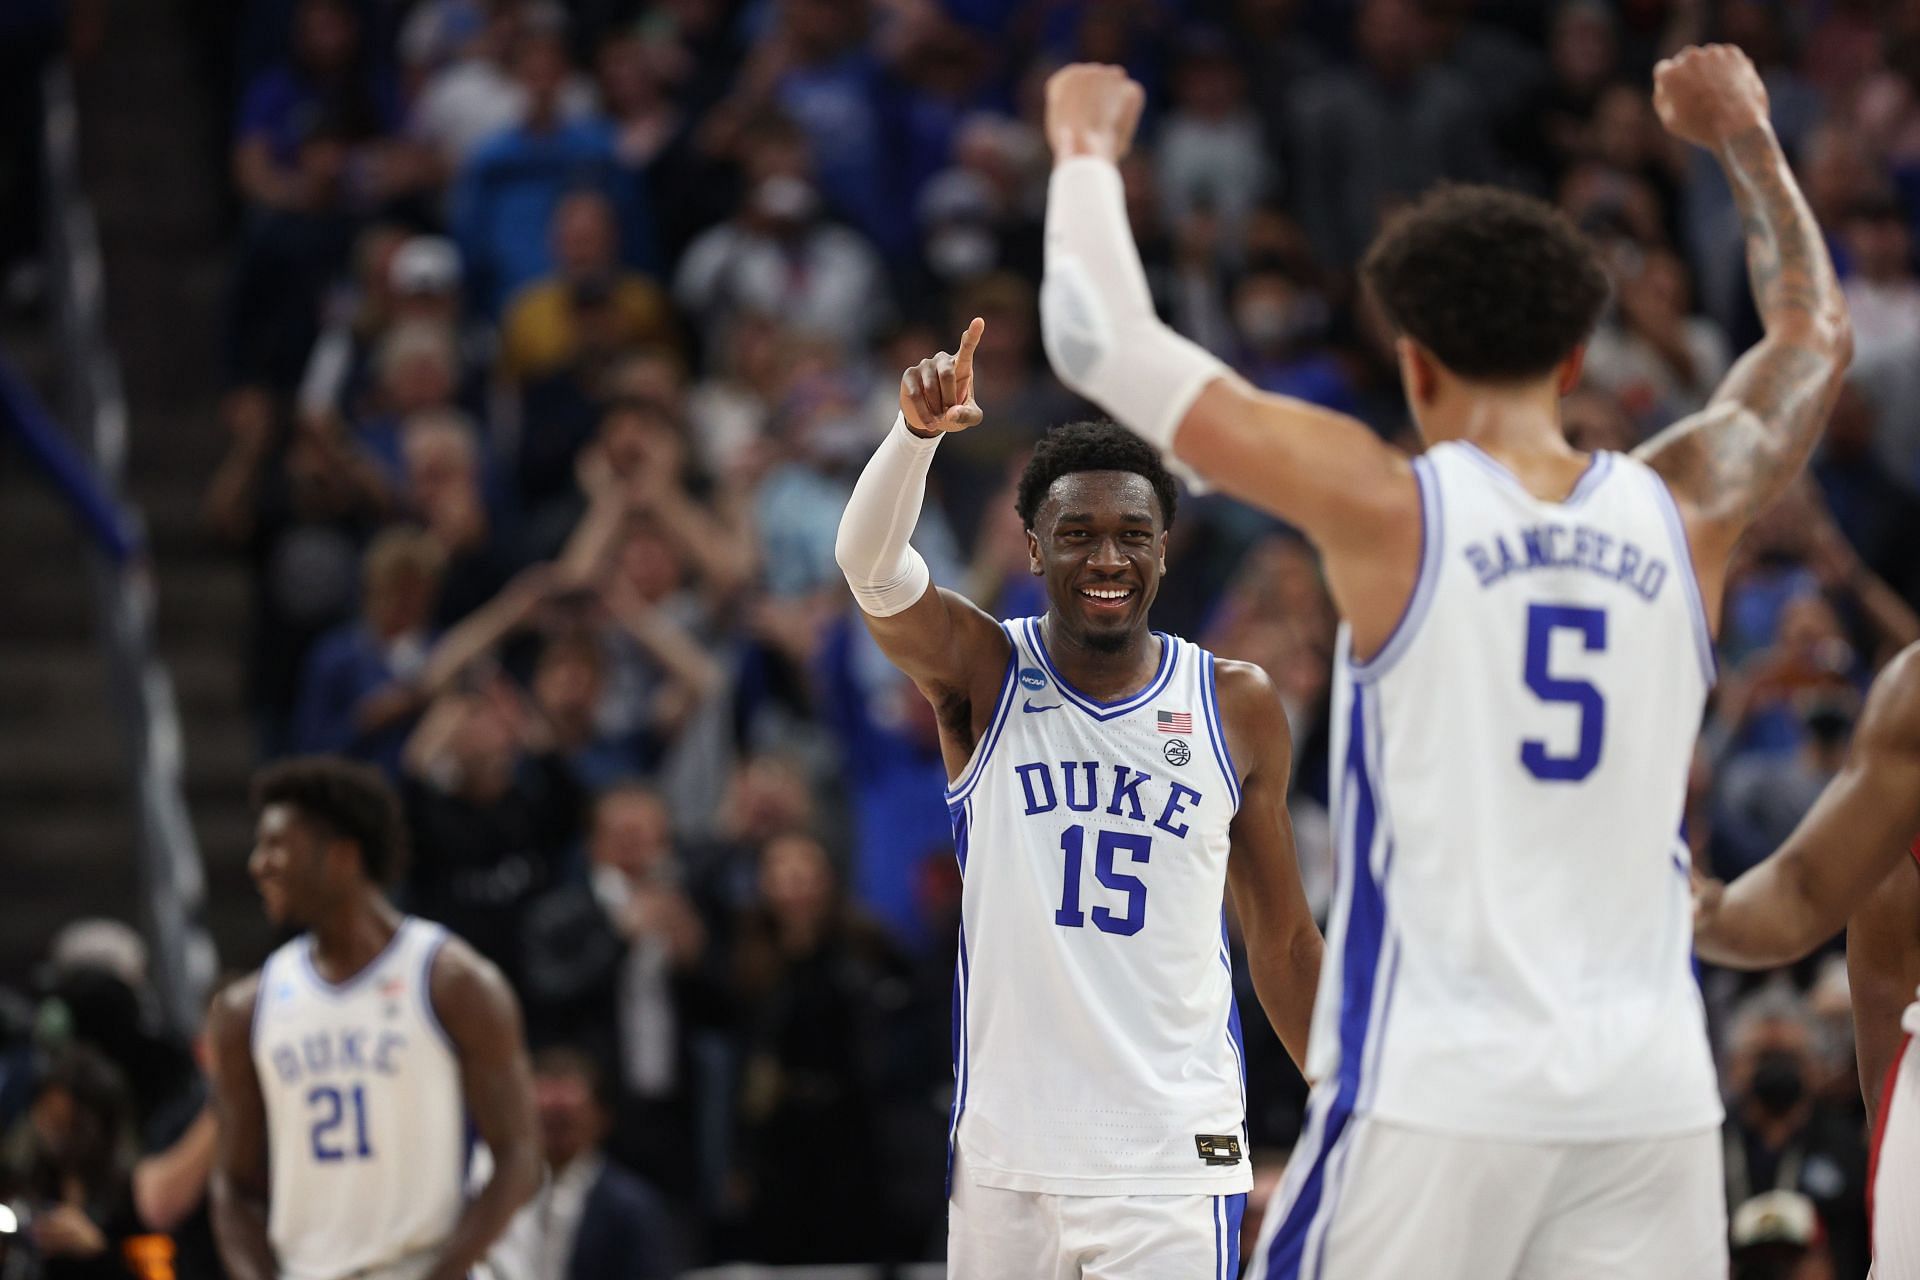 The Duke Blue Devils are preparing for their Final Four matchup against North Carolina.